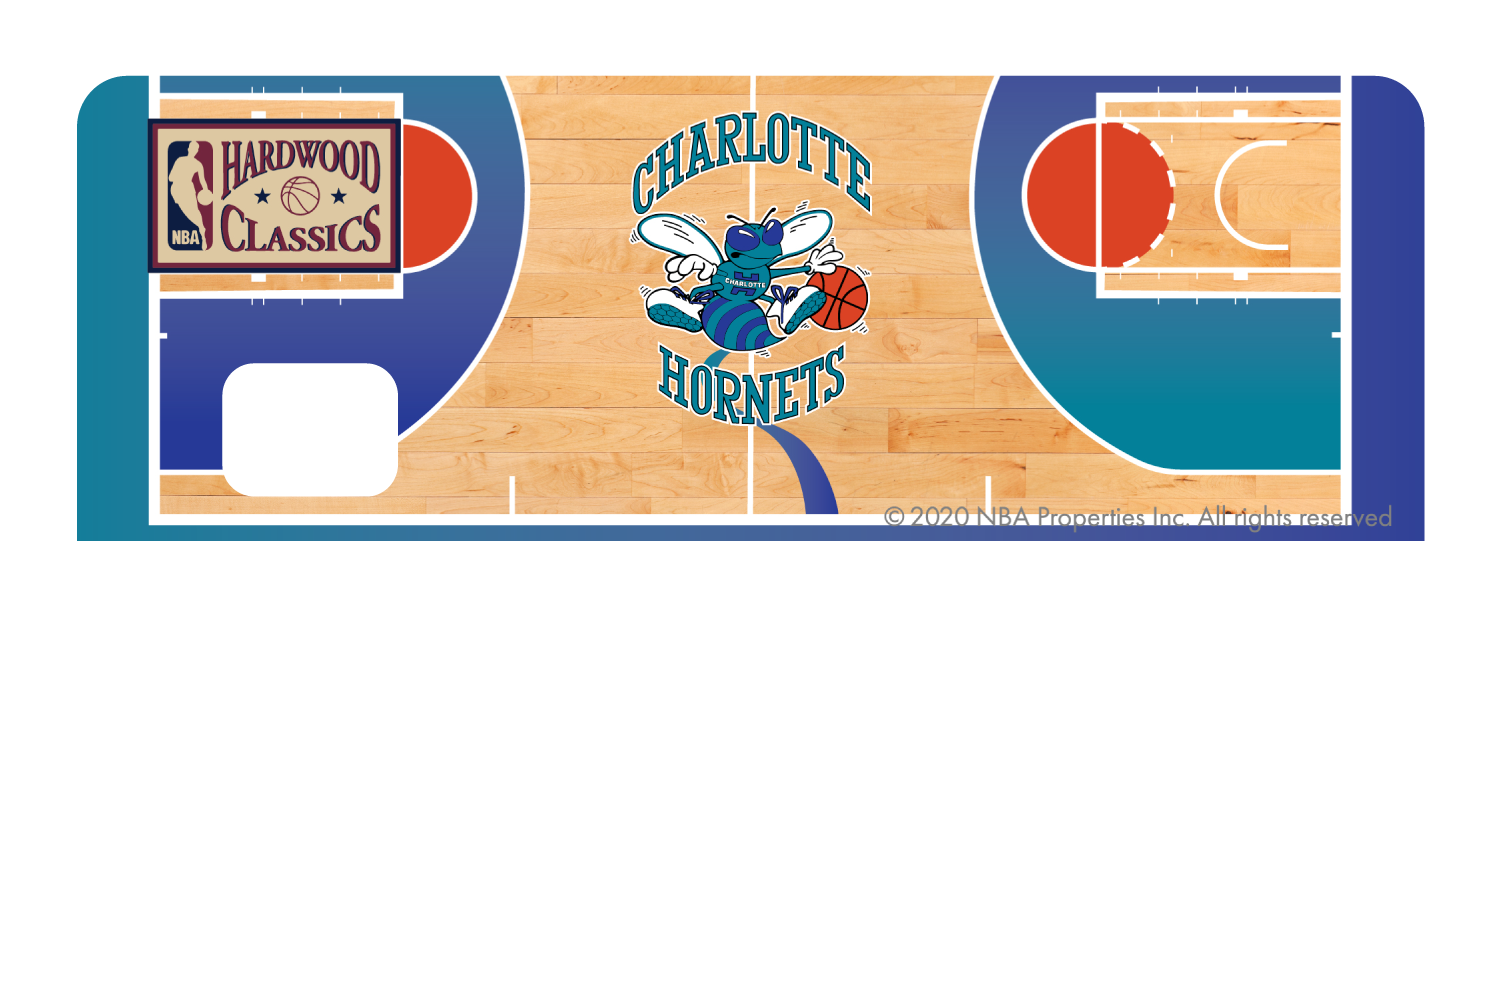 Credit Debit Card Skins | Cucu Covers - Customize Any Bank Card - Charlotte Hornets: Retro Courtside Hardwood Classics, Half Cover / Small Chip